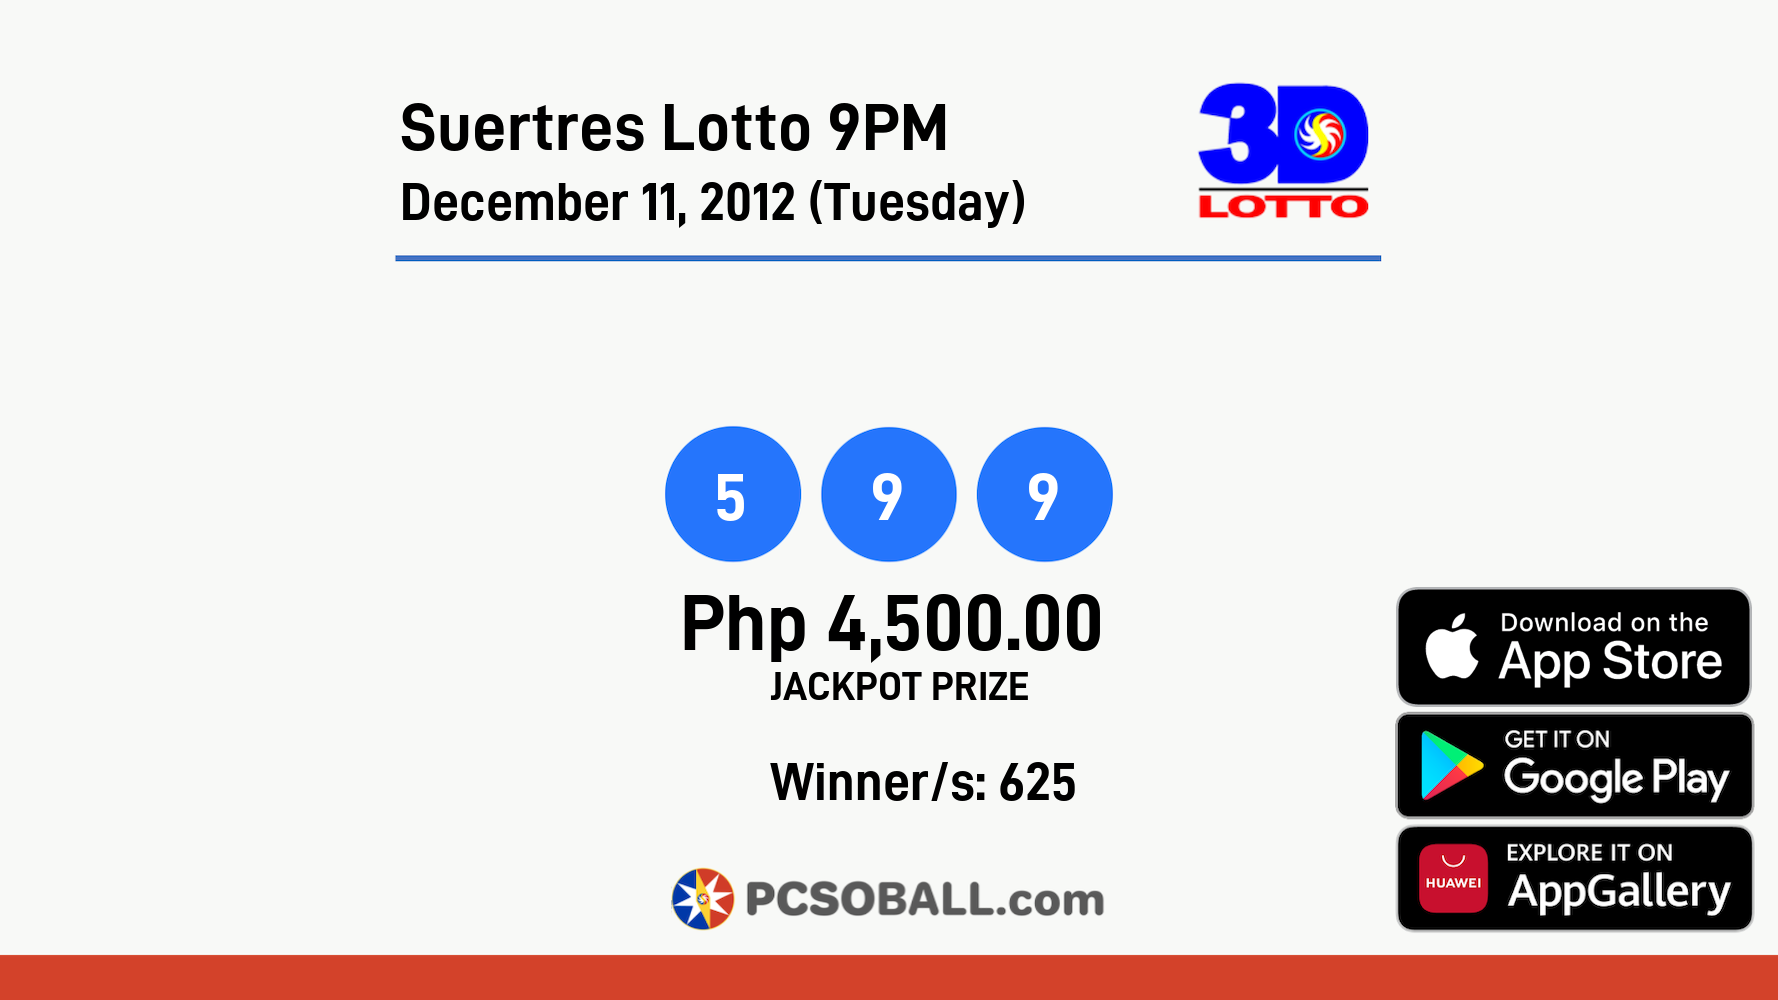 Suertres Lotto 9PM December 11, 2012 (Tuesday) Result